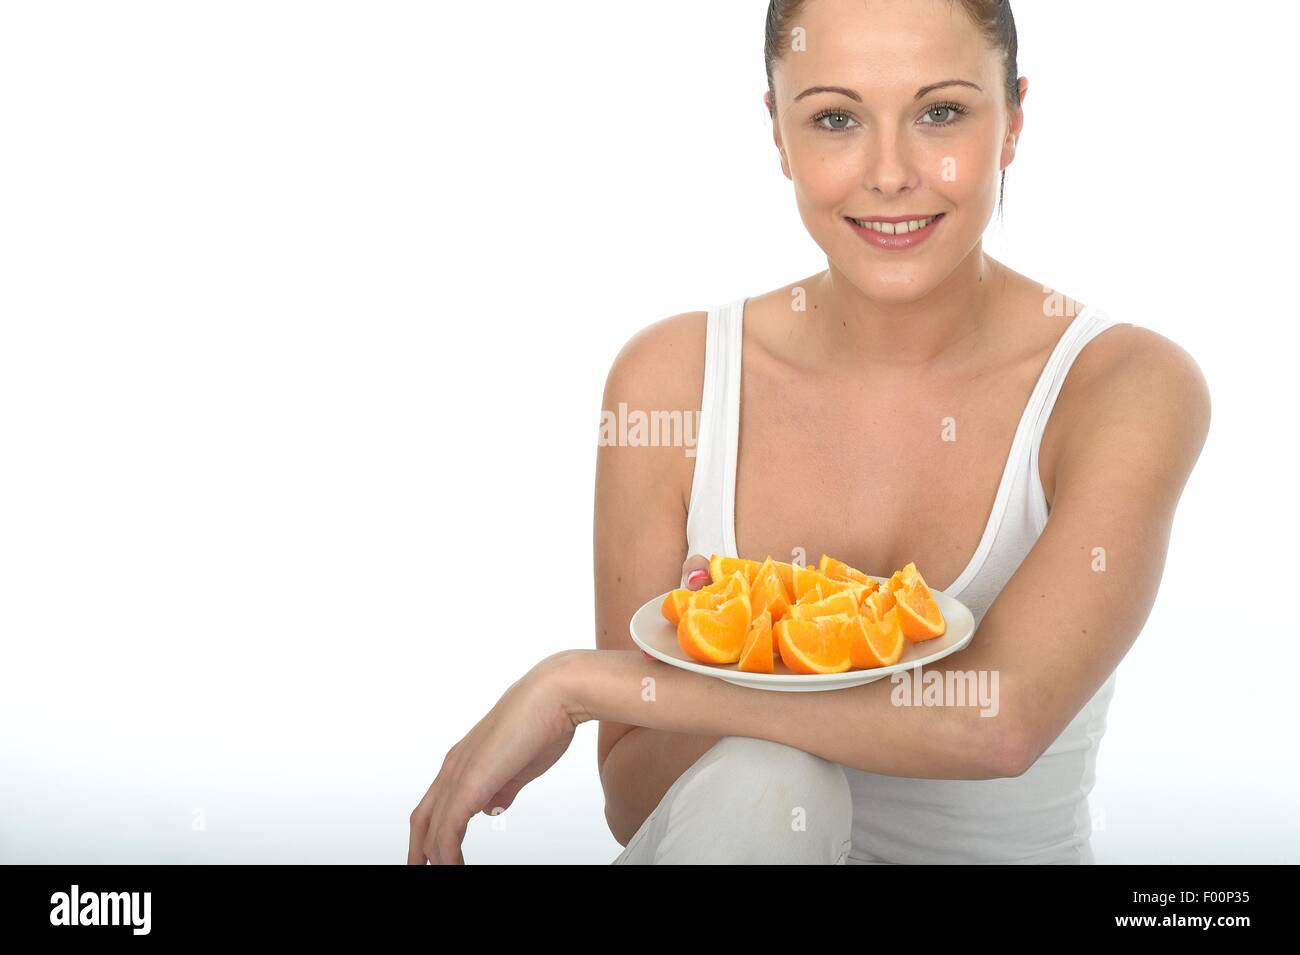 Positive Young Woman Eating Delicious Healthy Fresh Orange Fruit Segments Full Of Vitamin C Isolated Against A White Background With A Clipping Path Stock Photo